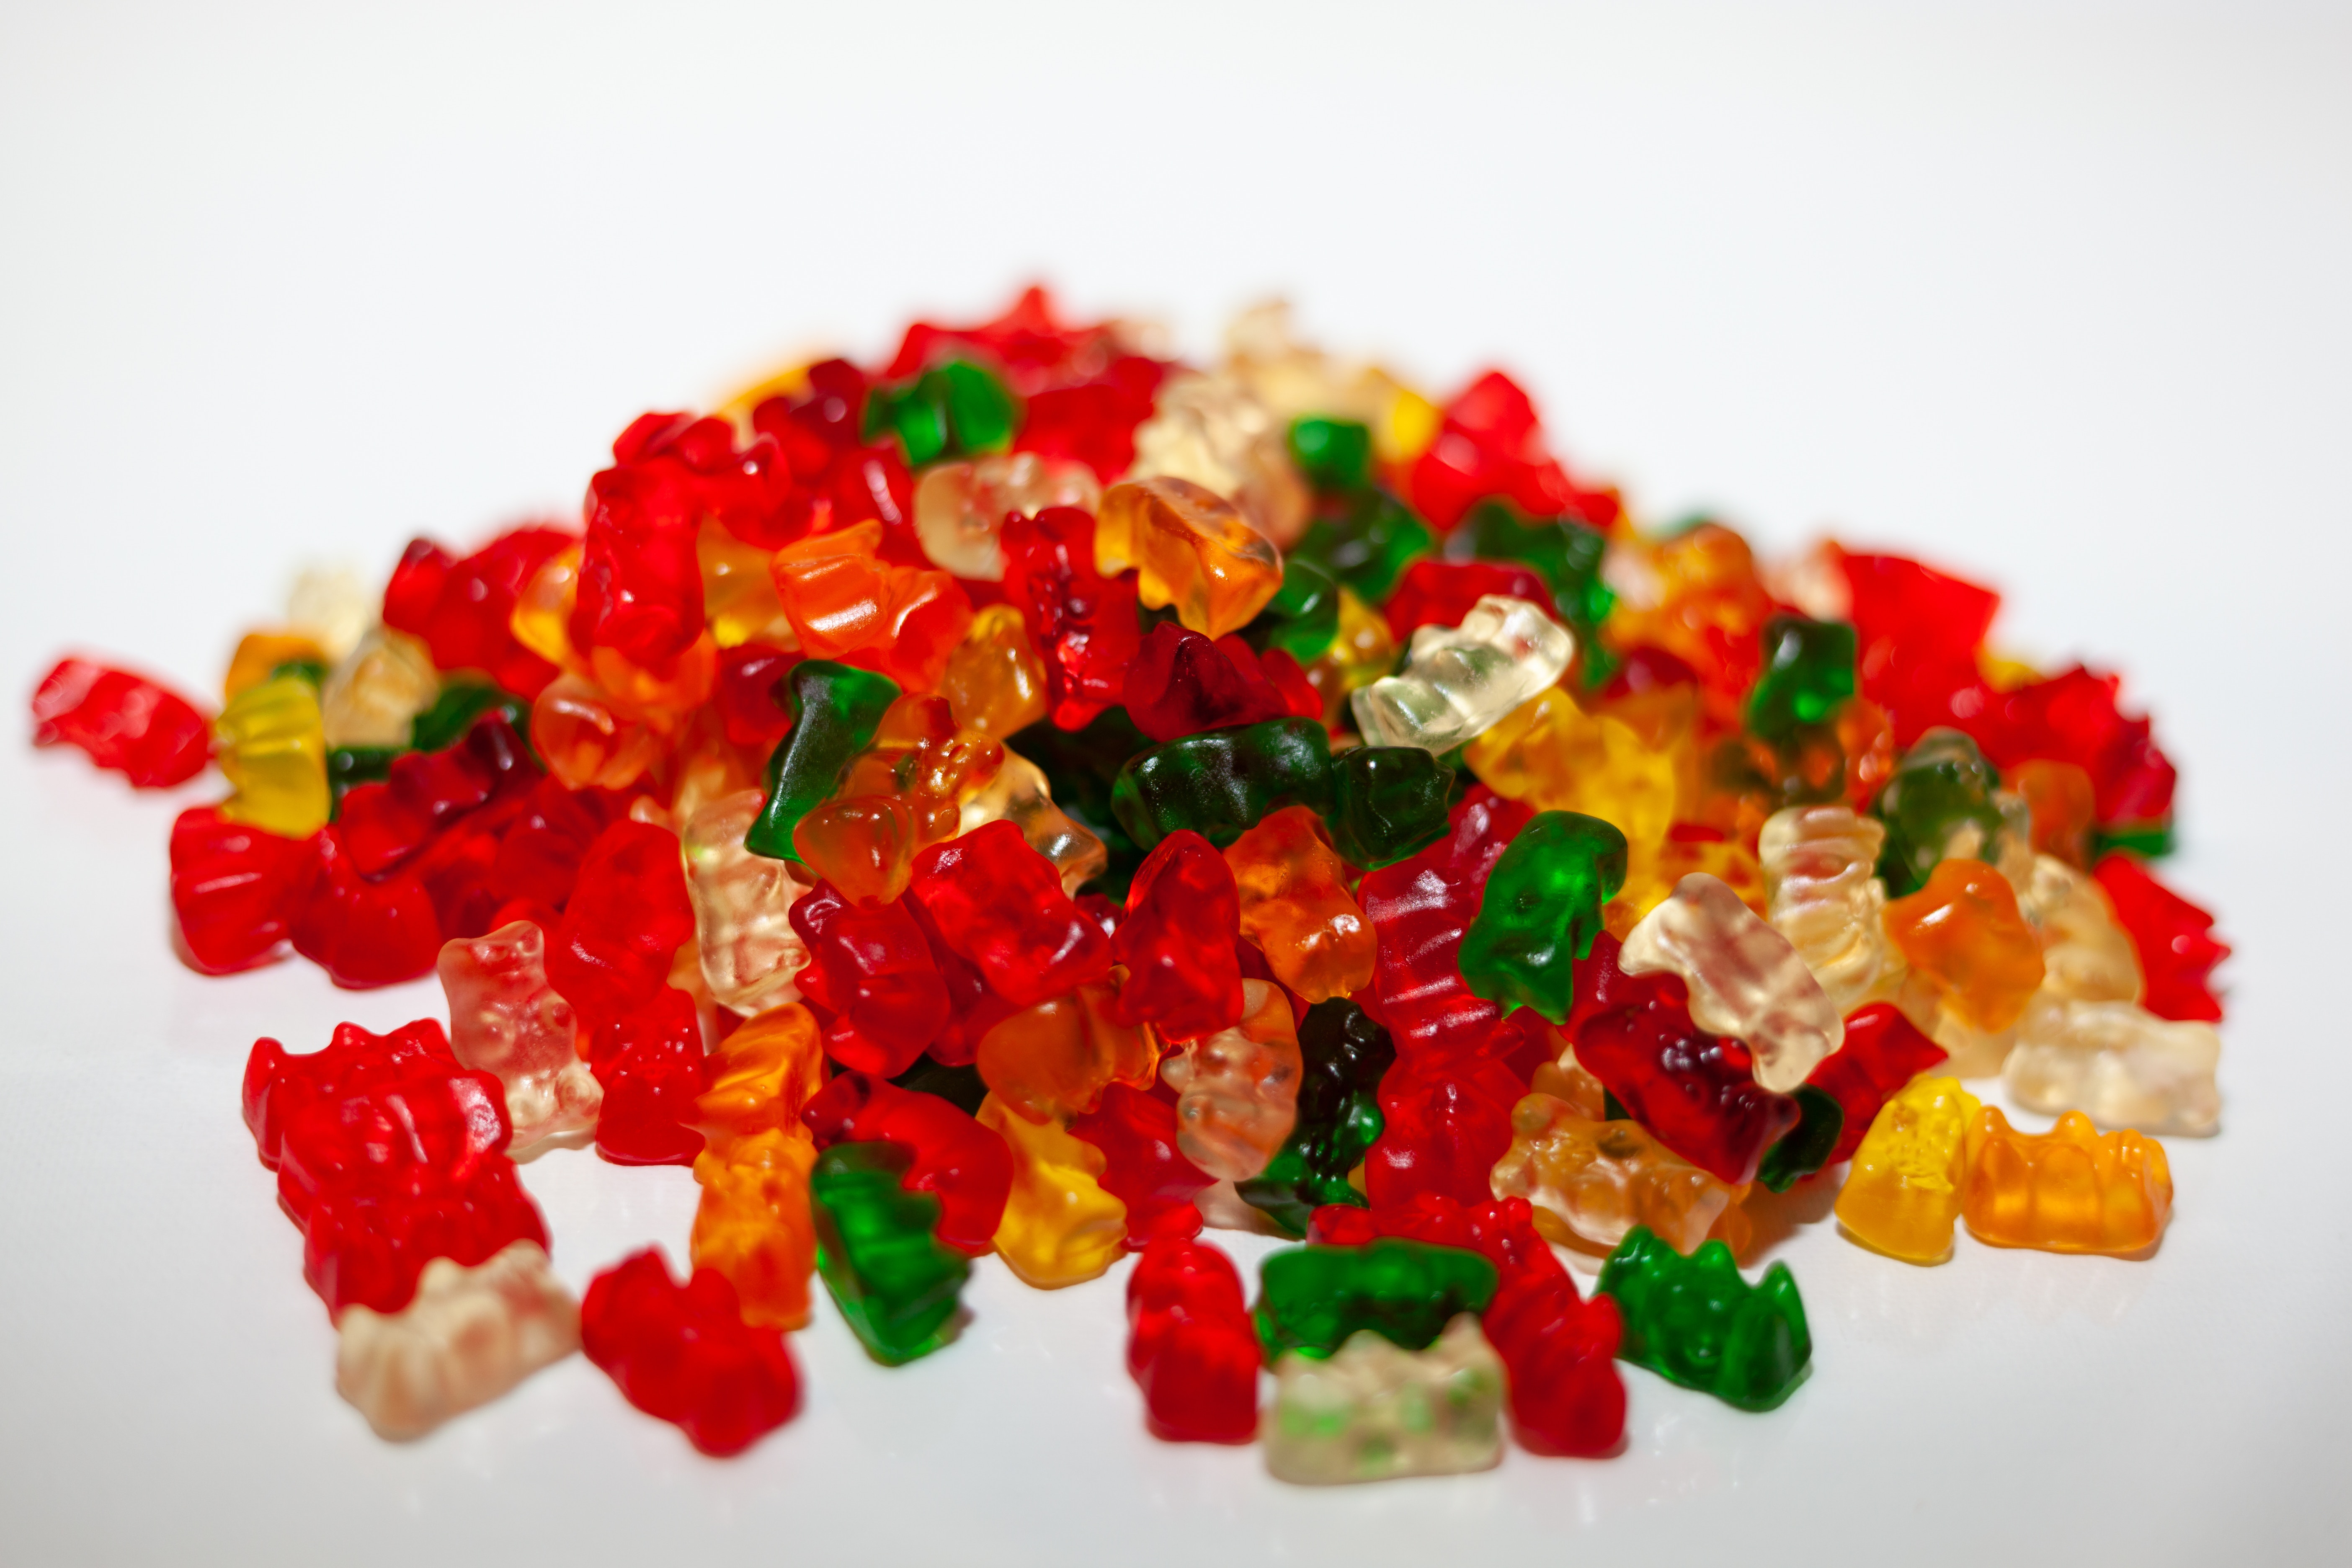 Edibles are marijuana-laced products gummy bears.